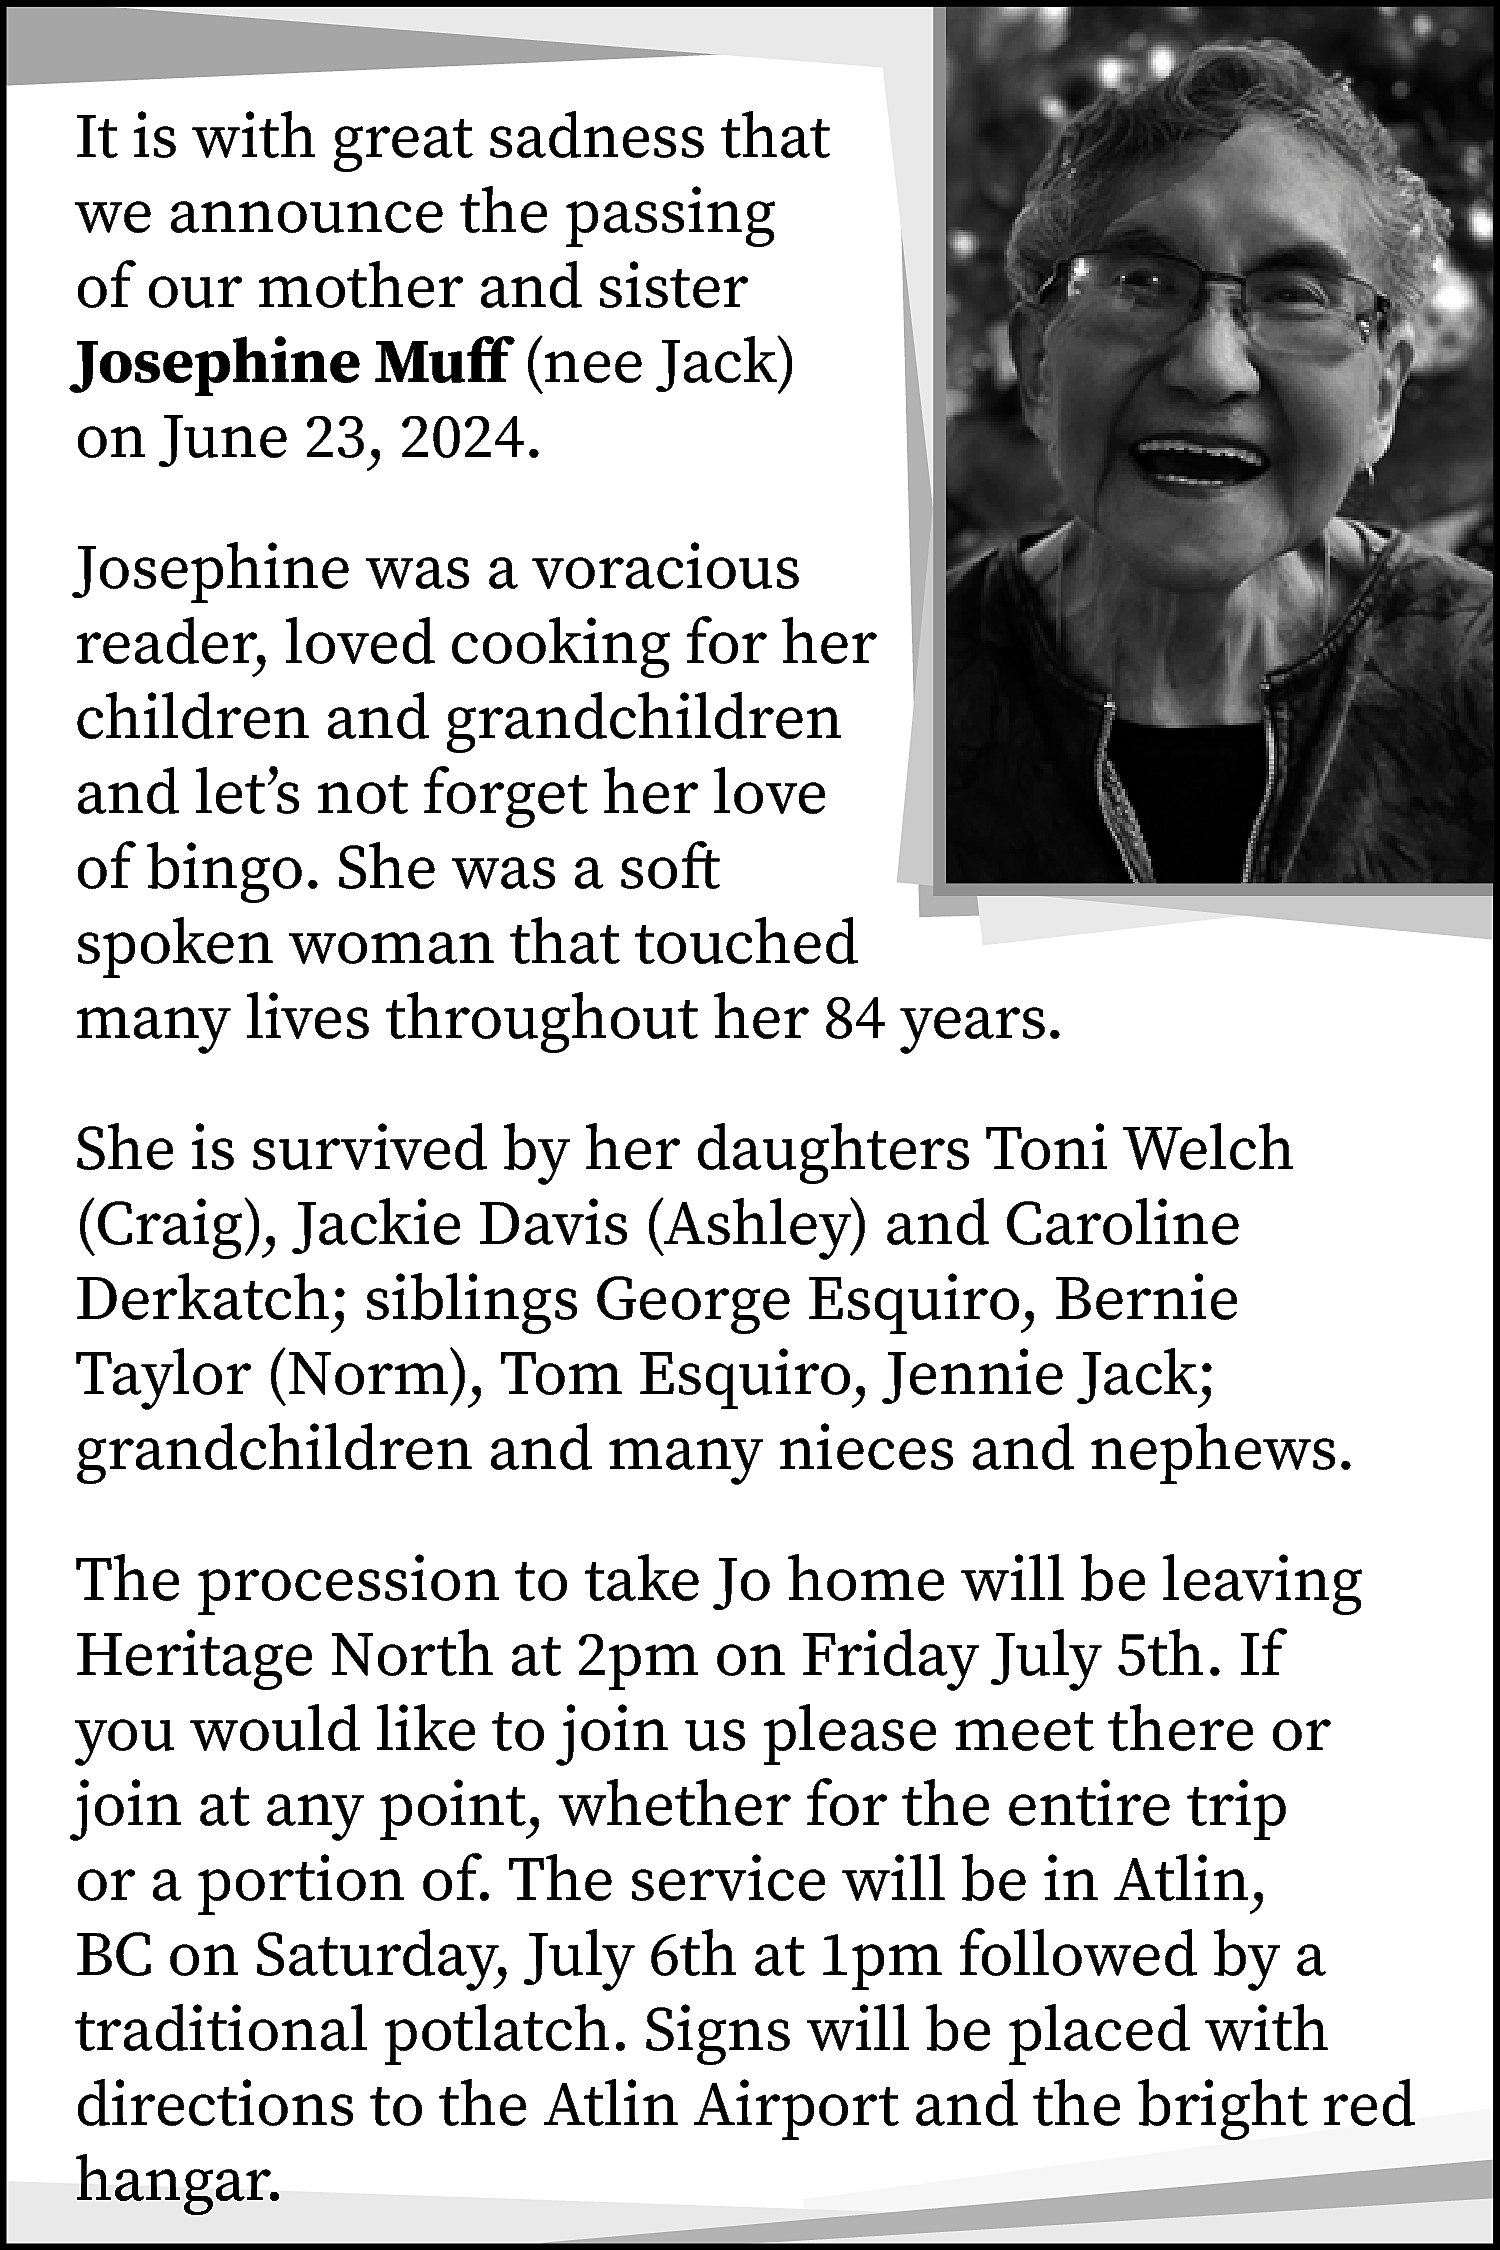 It is with great sadness  It is with great sadness that  we announce the passing  of our mother and sister  Josephine Muff (nee Jack)  on June 23, 2024.  Josephine was a voracious  reader, loved cooking for her  children and grandchildren  and let’s not forget her love  of bingo. She was a soft  spoken woman that touched  many lives throughout her 84 years.  She is survived by her daughters Toni Welch  (Craig), Jackie Davis (Ashley) and Caroline  Derkatch; siblings George Esquiro, Bernie  Taylor (Norm), Tom Esquiro, Jennie Jack;  grandchildren and many nieces and nephews.  The procession to take Jo home will be leaving  Heritage North at 2pm on Friday July 5th. If  you would like to join us please meet there or  join at any point, whether for the entire trip  or a portion of. The service will be in Atlin,  BC on Saturday, July 6th at 1pm followed by a  traditional potlatch. Signs will be placed with  directions to the Atlin Airport and the bright red  hangar.    